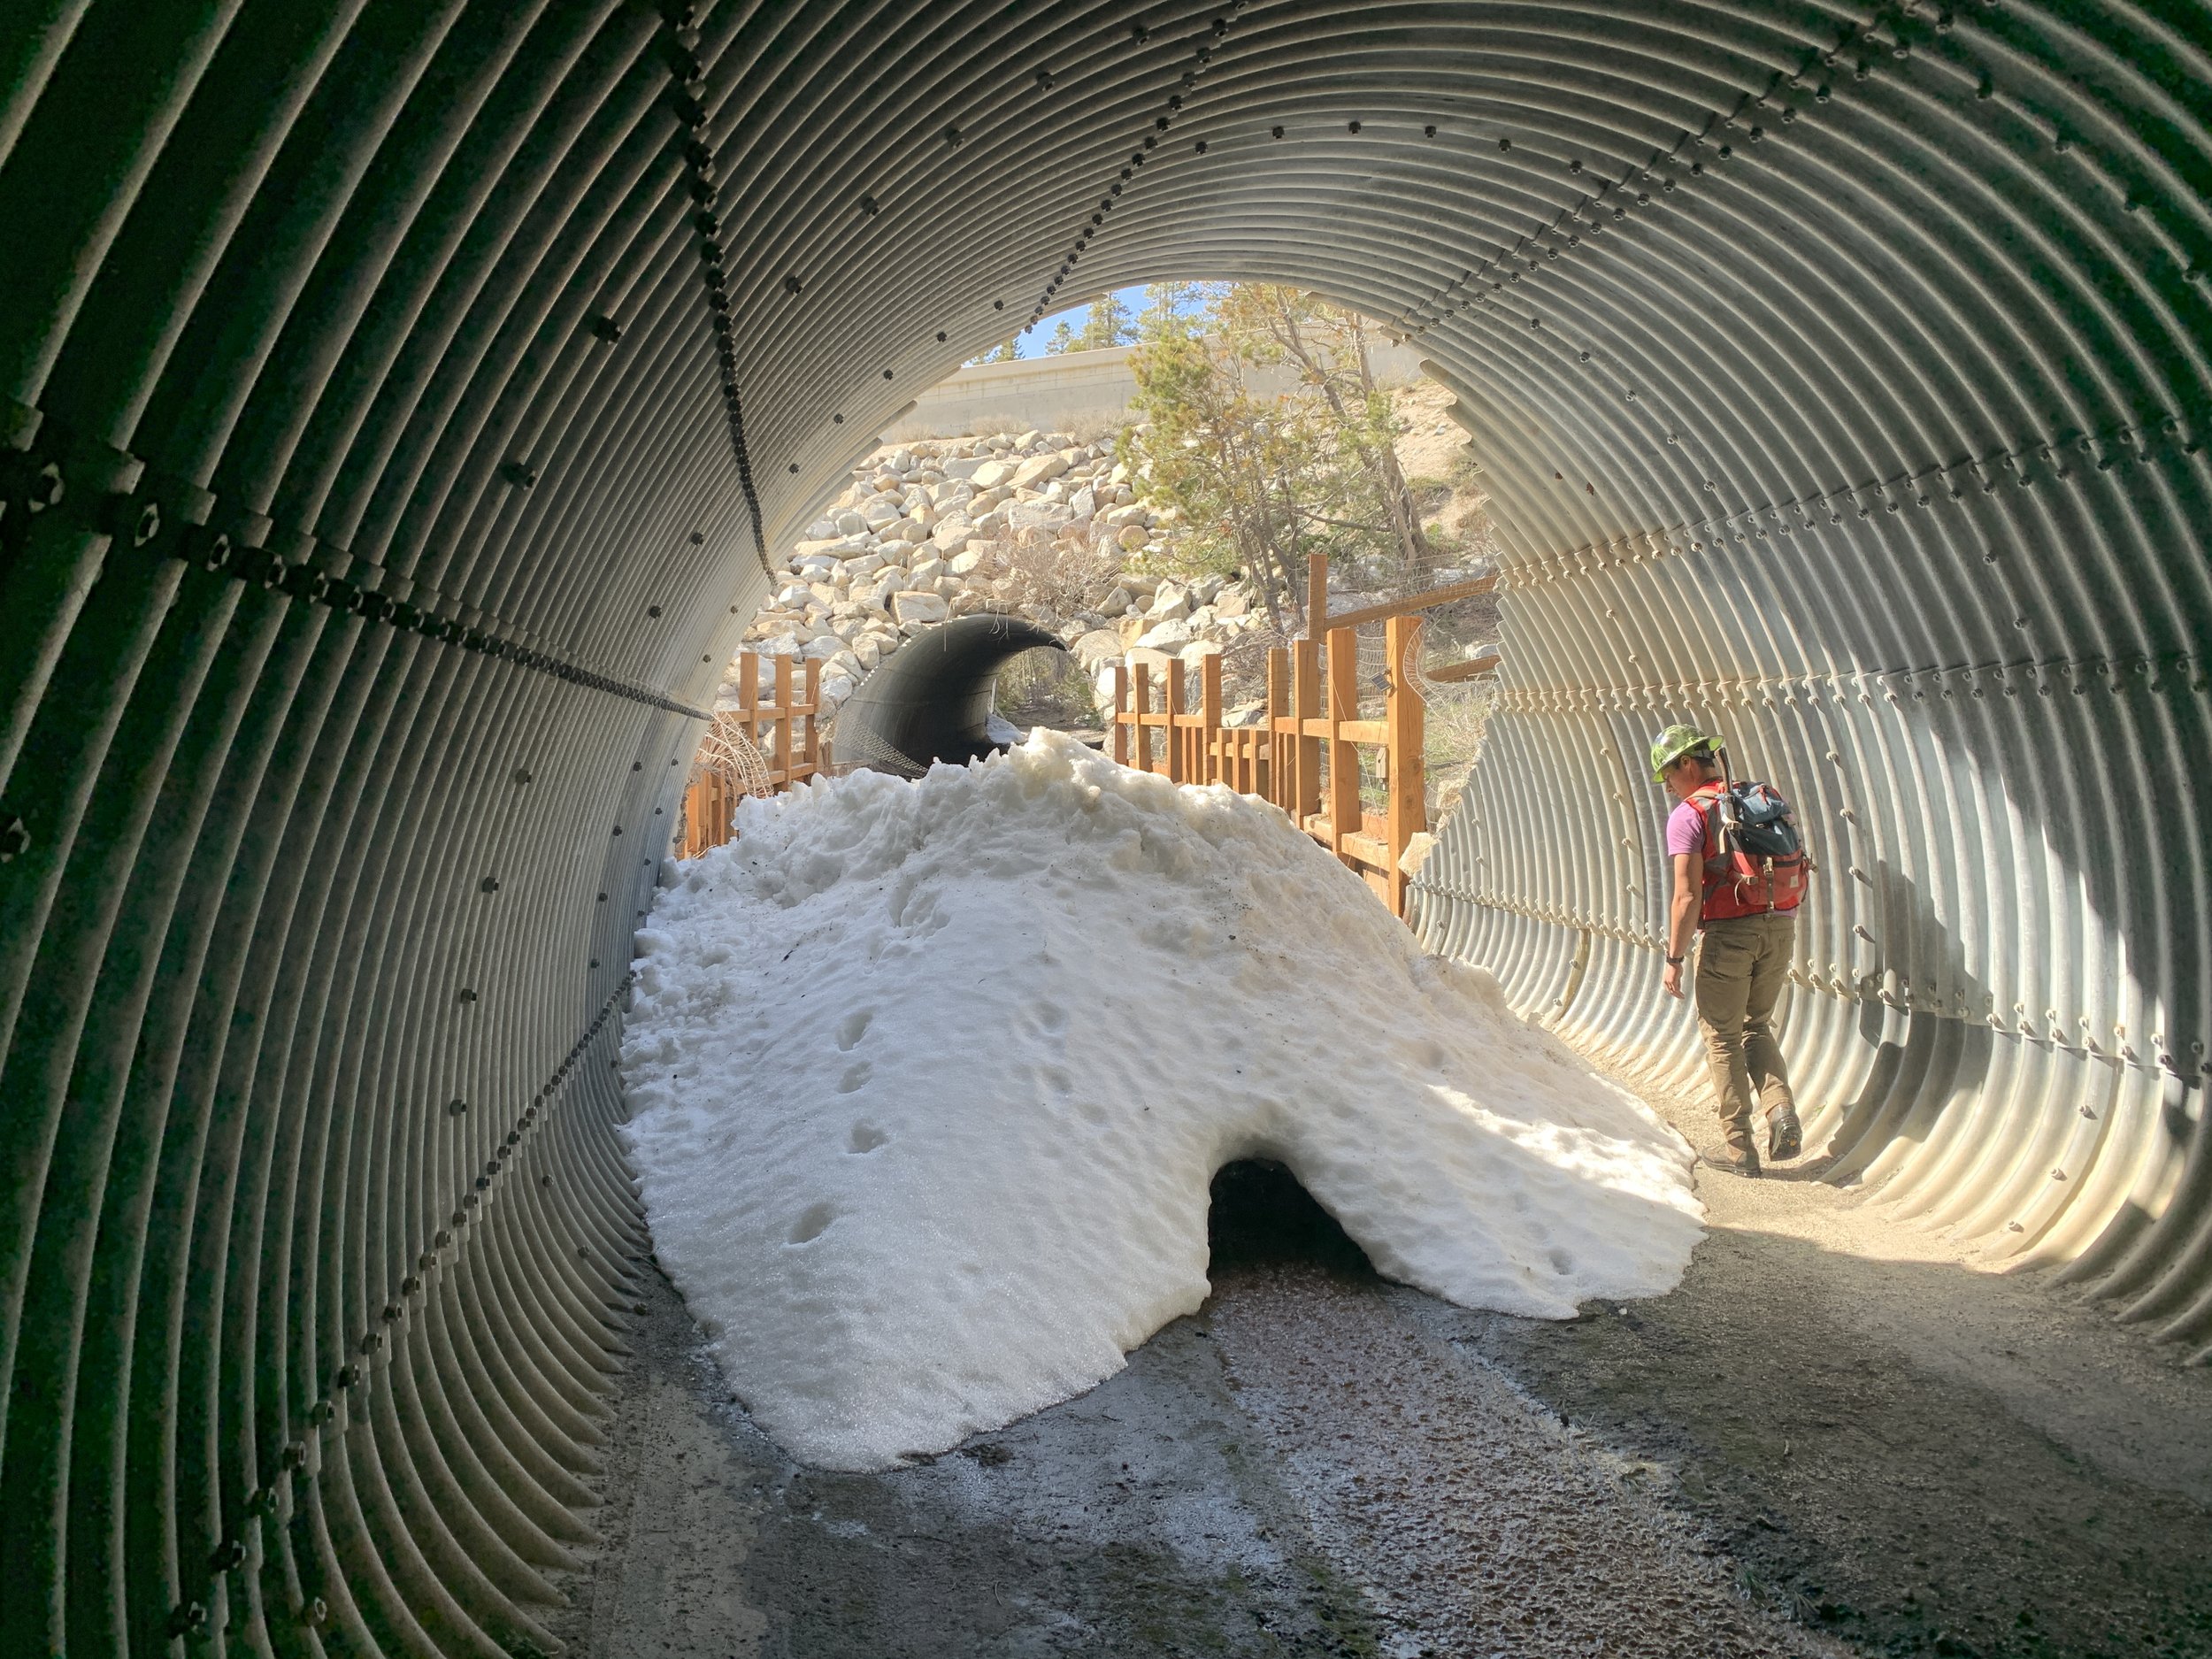  The California Department of Transportation (Caltrans) has been proactive in using mitigation strategies to construct needed wildlife underpasses along several sections of I-80. At several thousand feet above sea level, snow was still plentiful in s